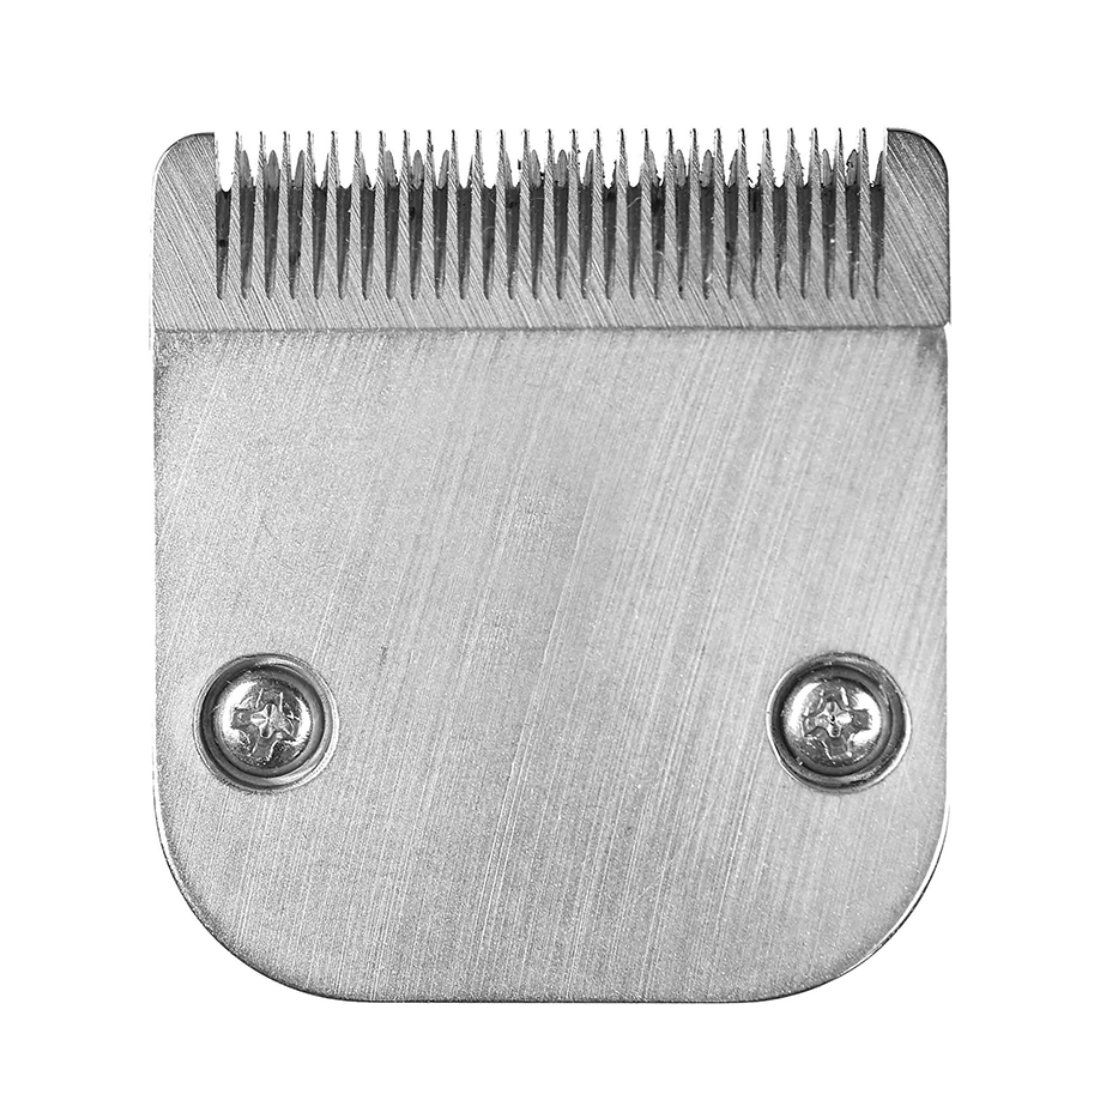 Animal haircutting clippers, blades, scissors, thinning plates,  accessories